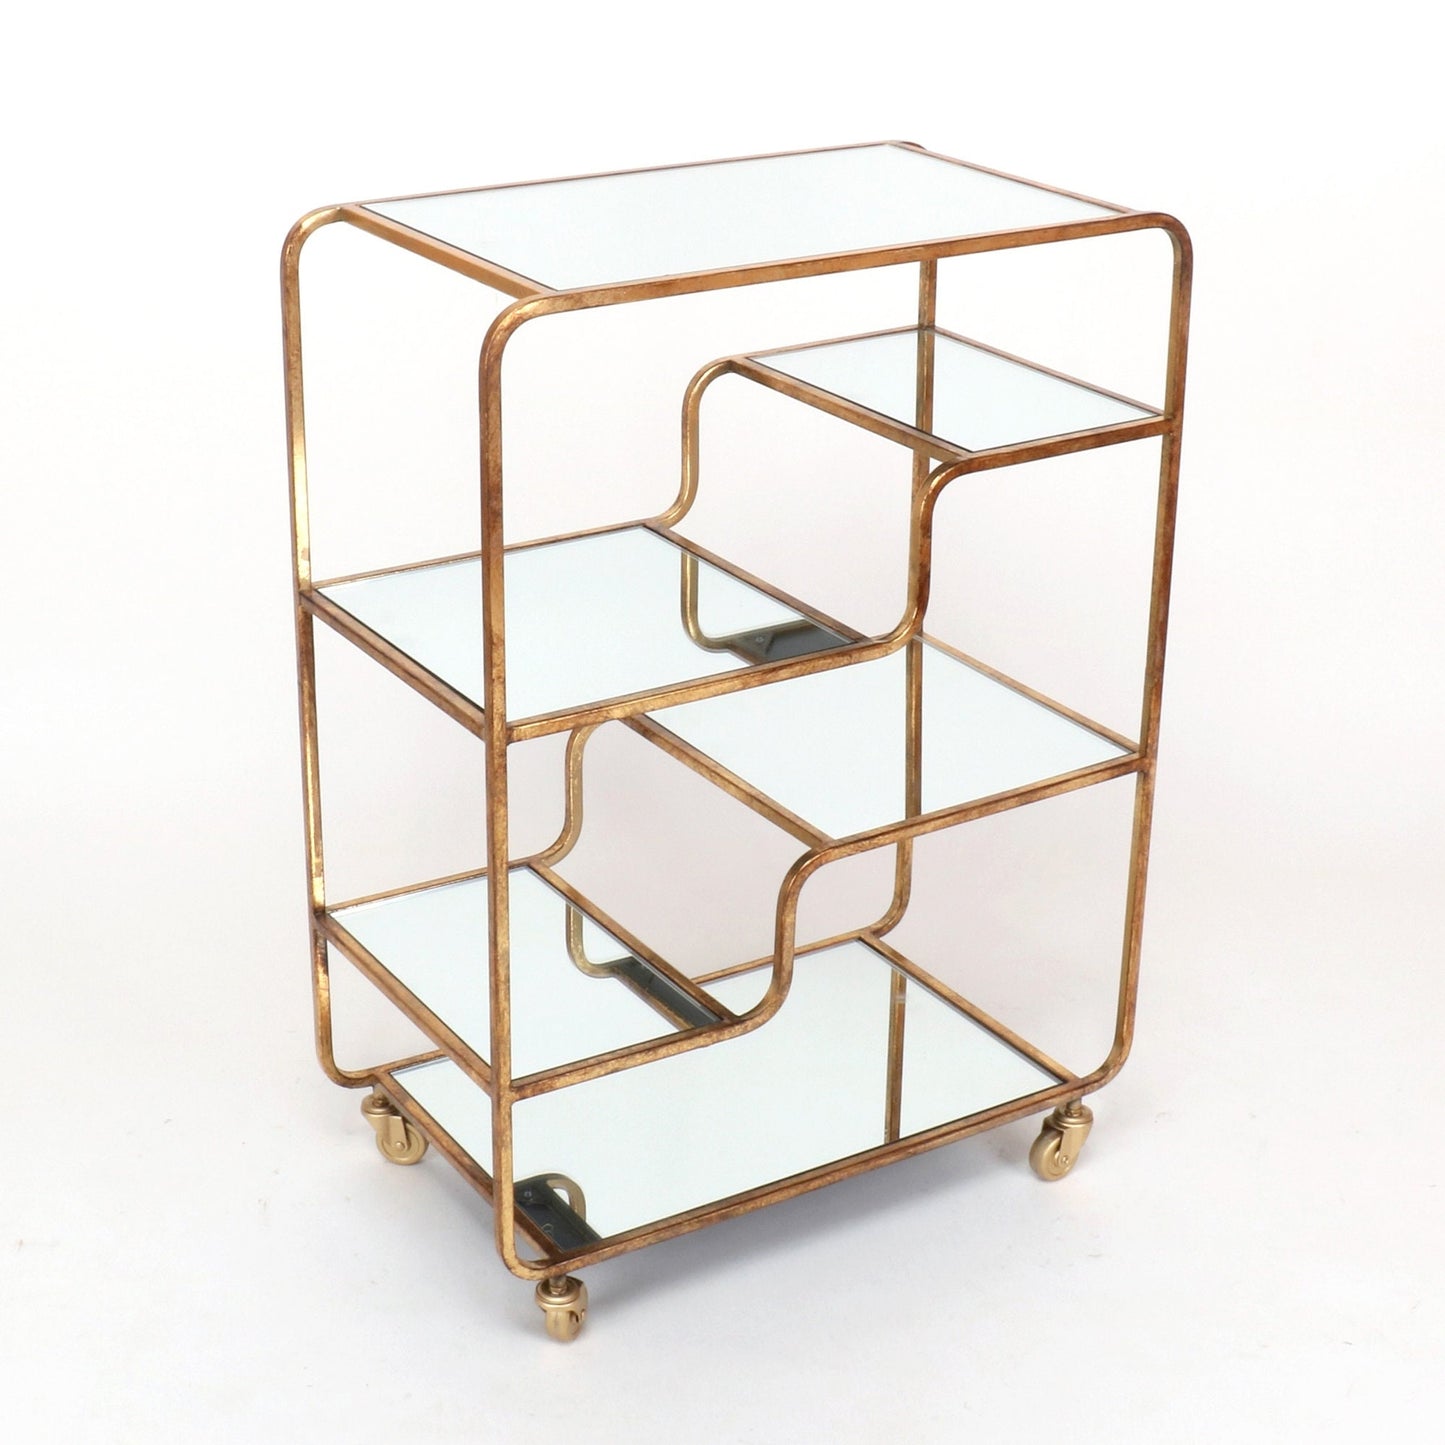 Glamourous gold finish Drinks Trolley - Gold Gilt Leaf